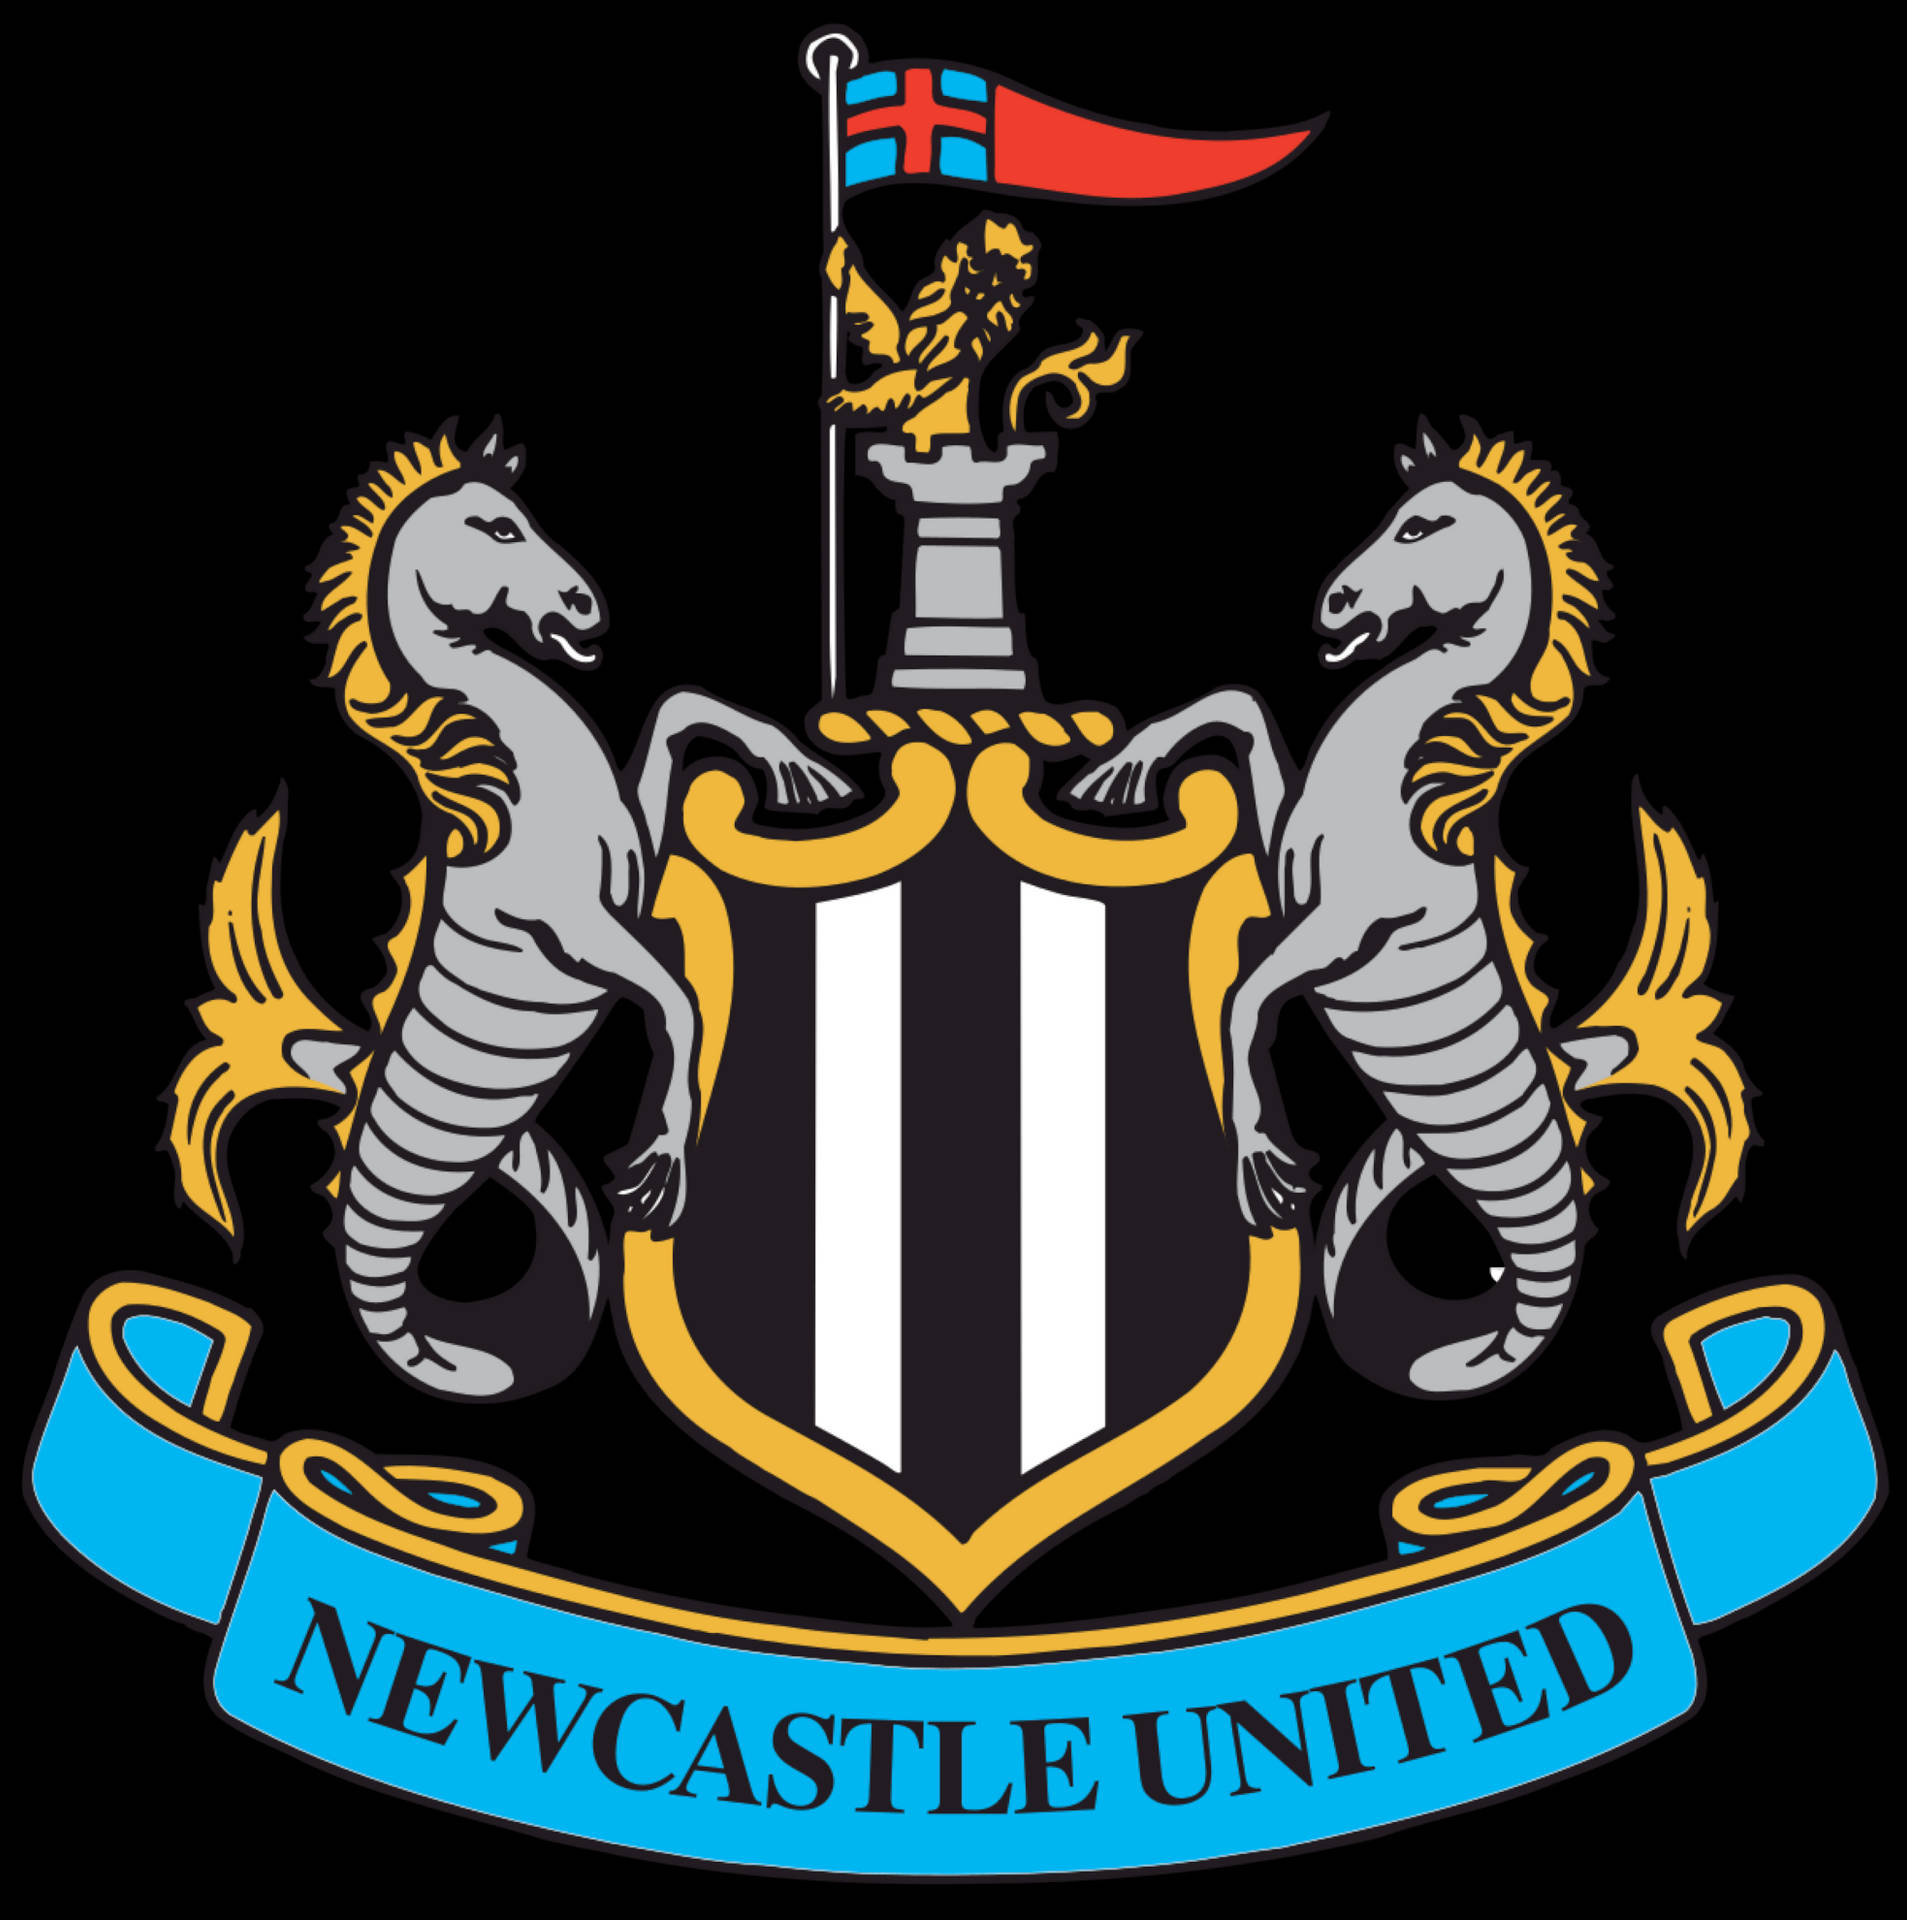 A Captivating Black and White Newcastle United FC Logo Wallpaper